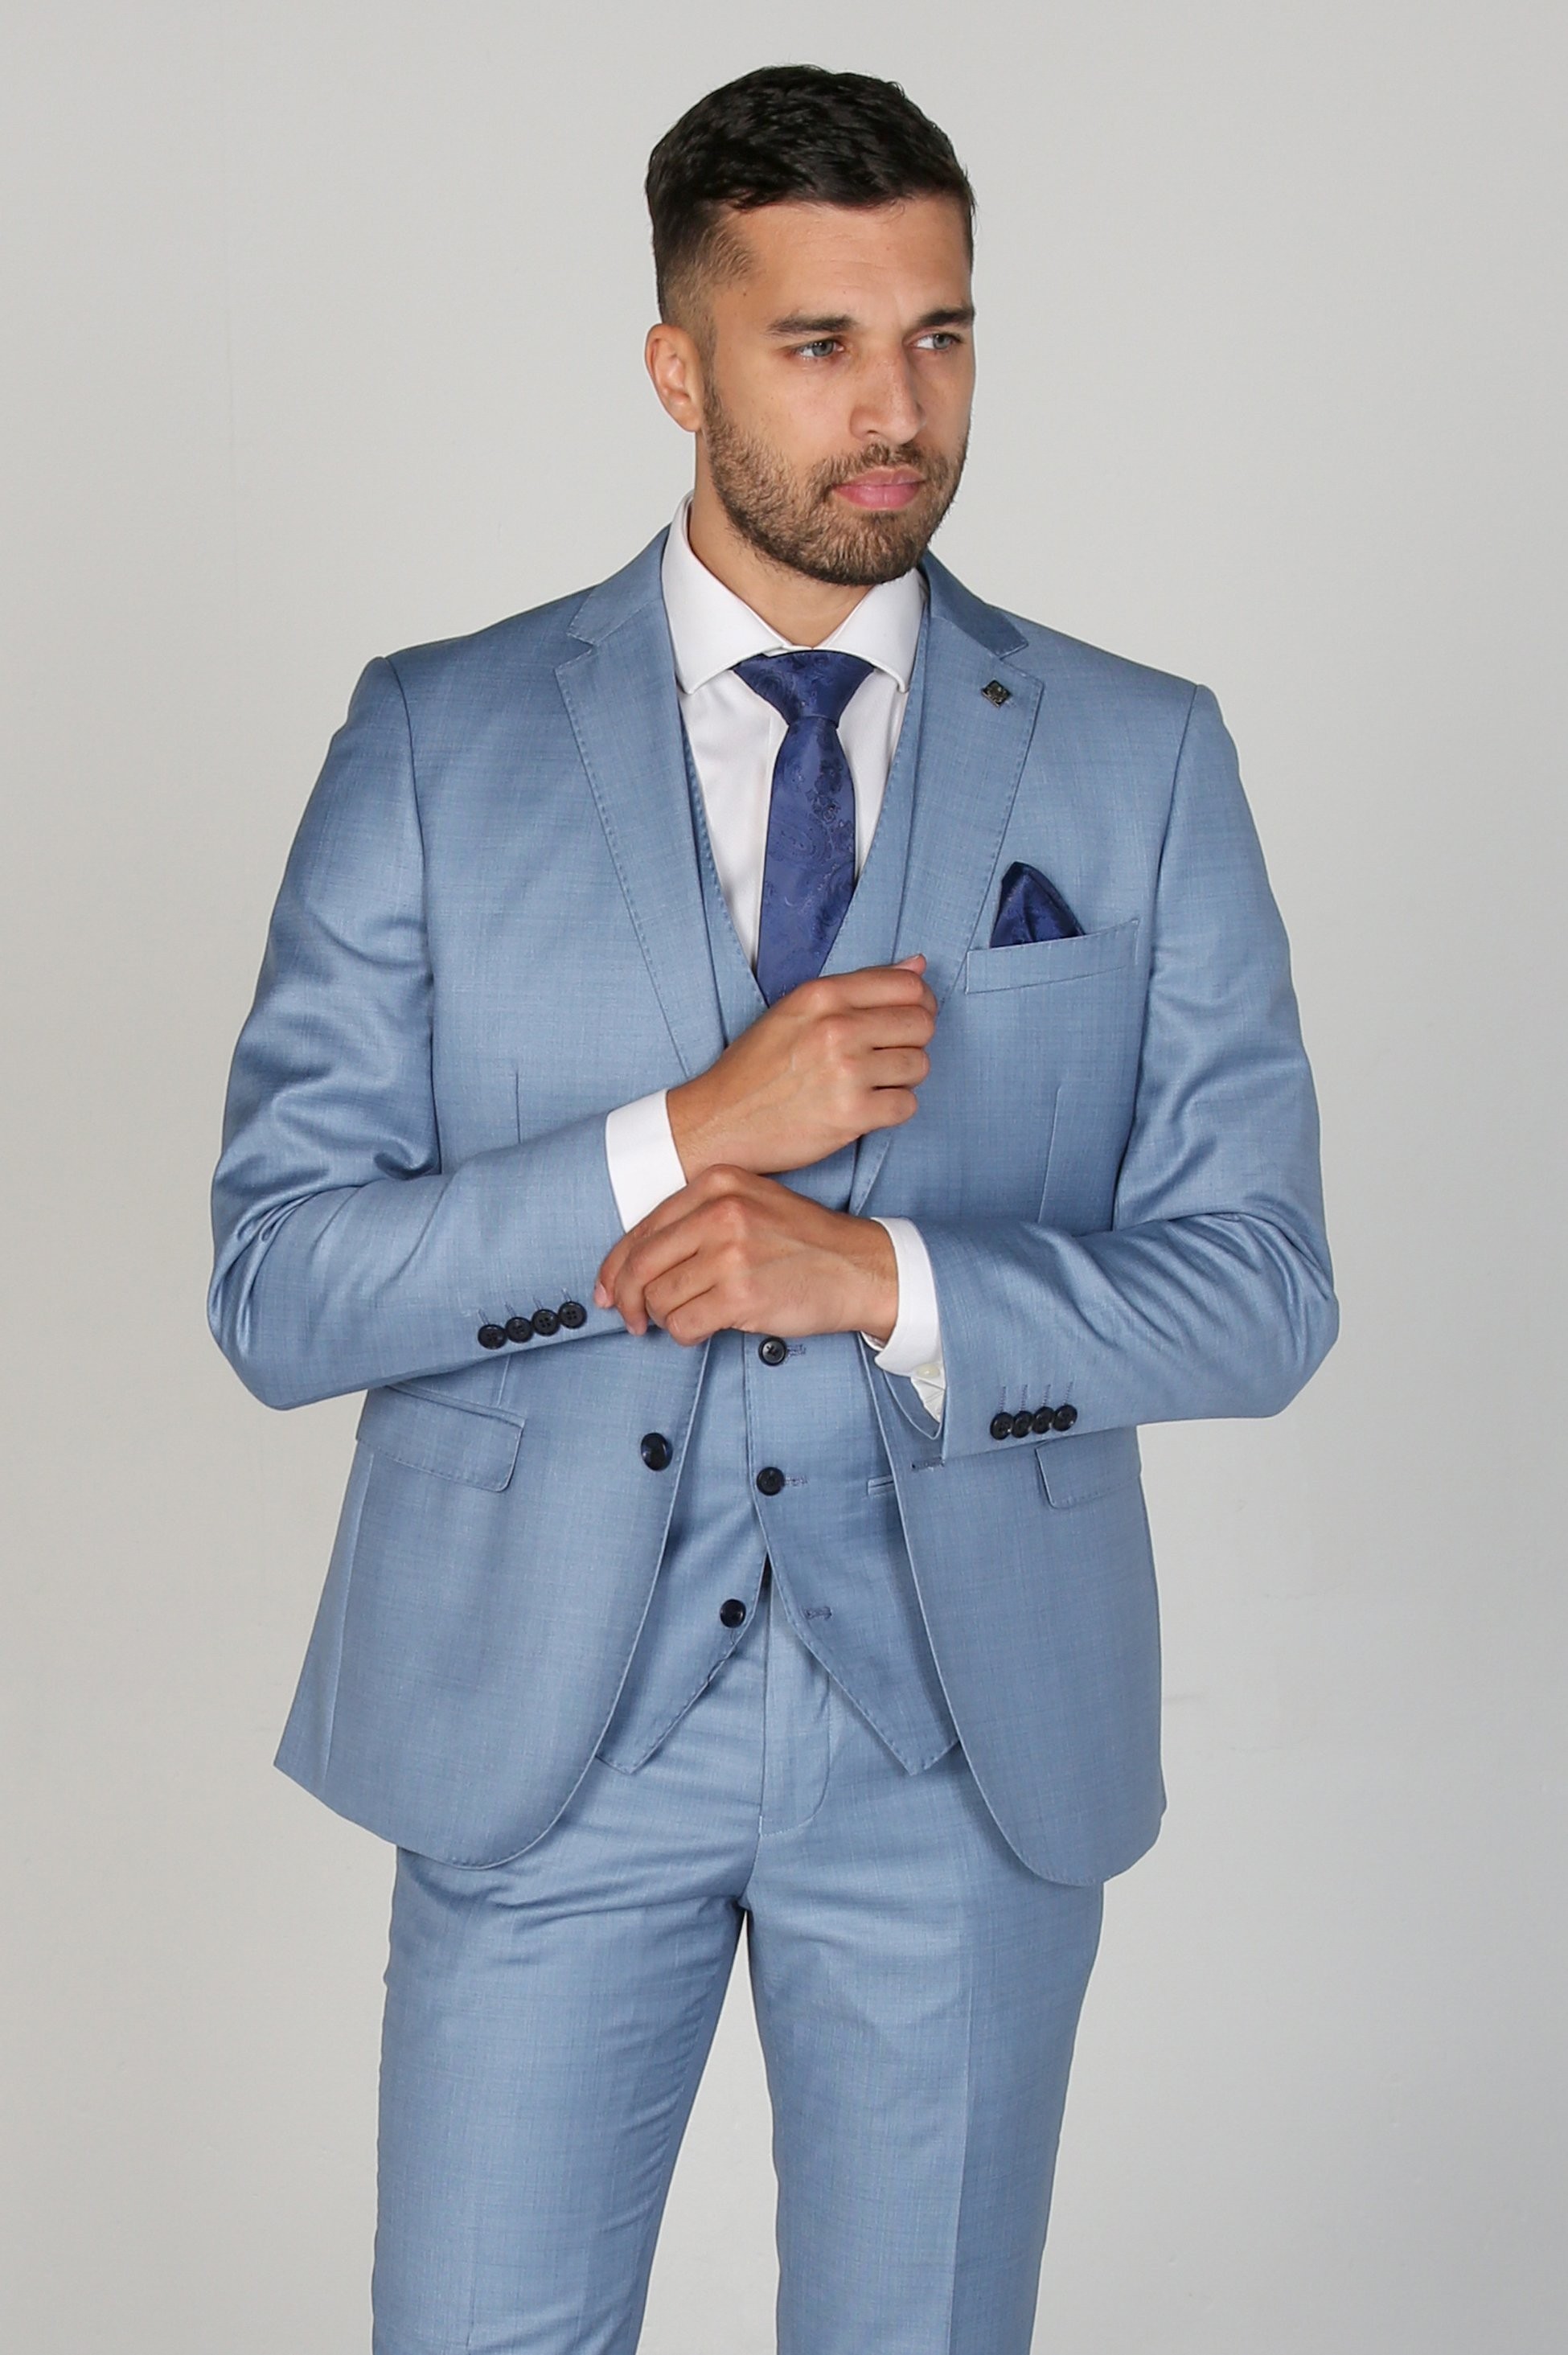 Men's Tailored Fit Formal Suit  - CHARLES - Blue